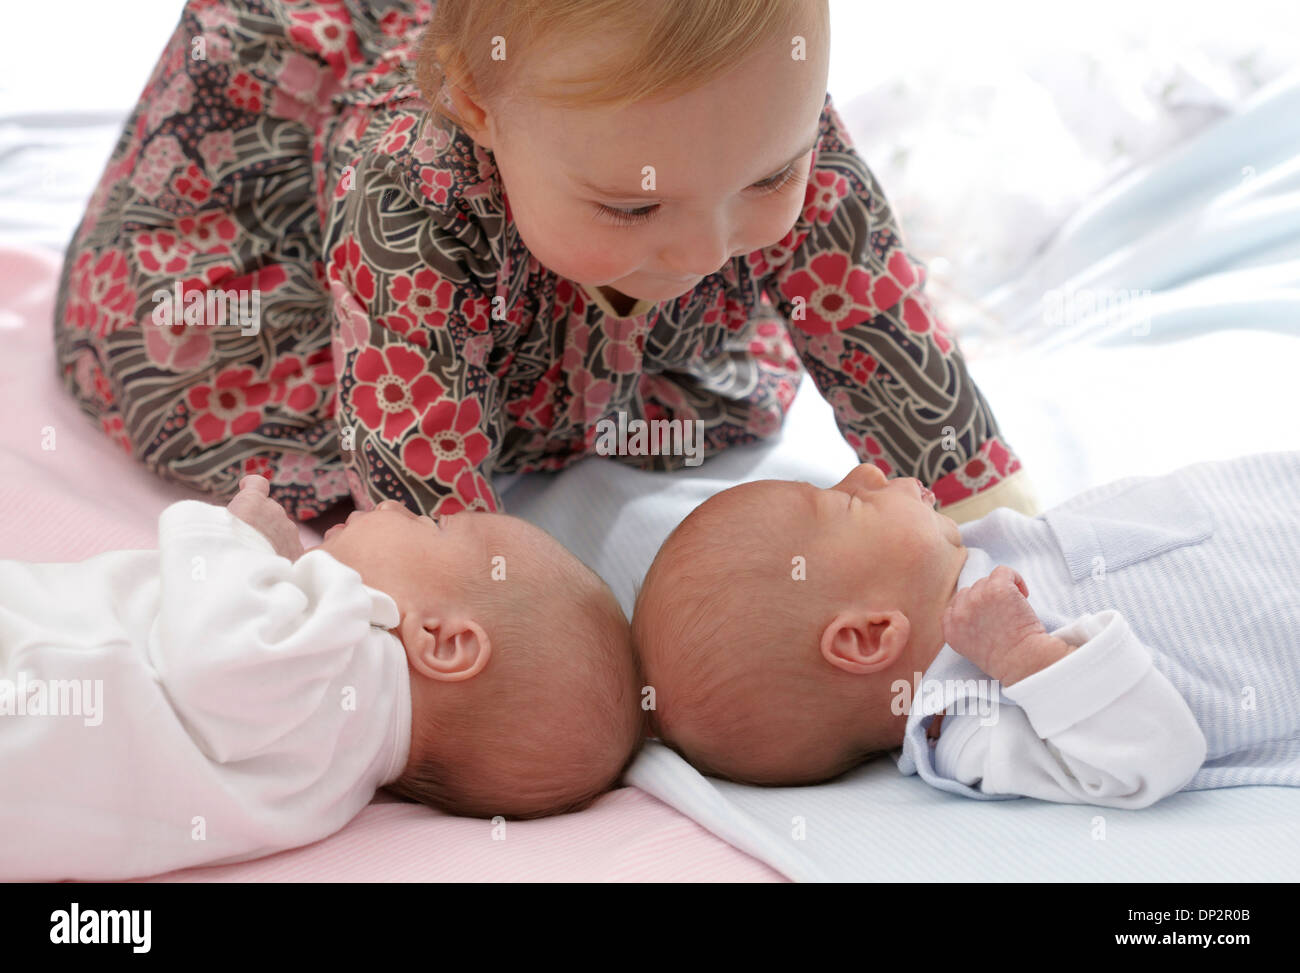 One year old girl with baby twin siblings Stock Photo